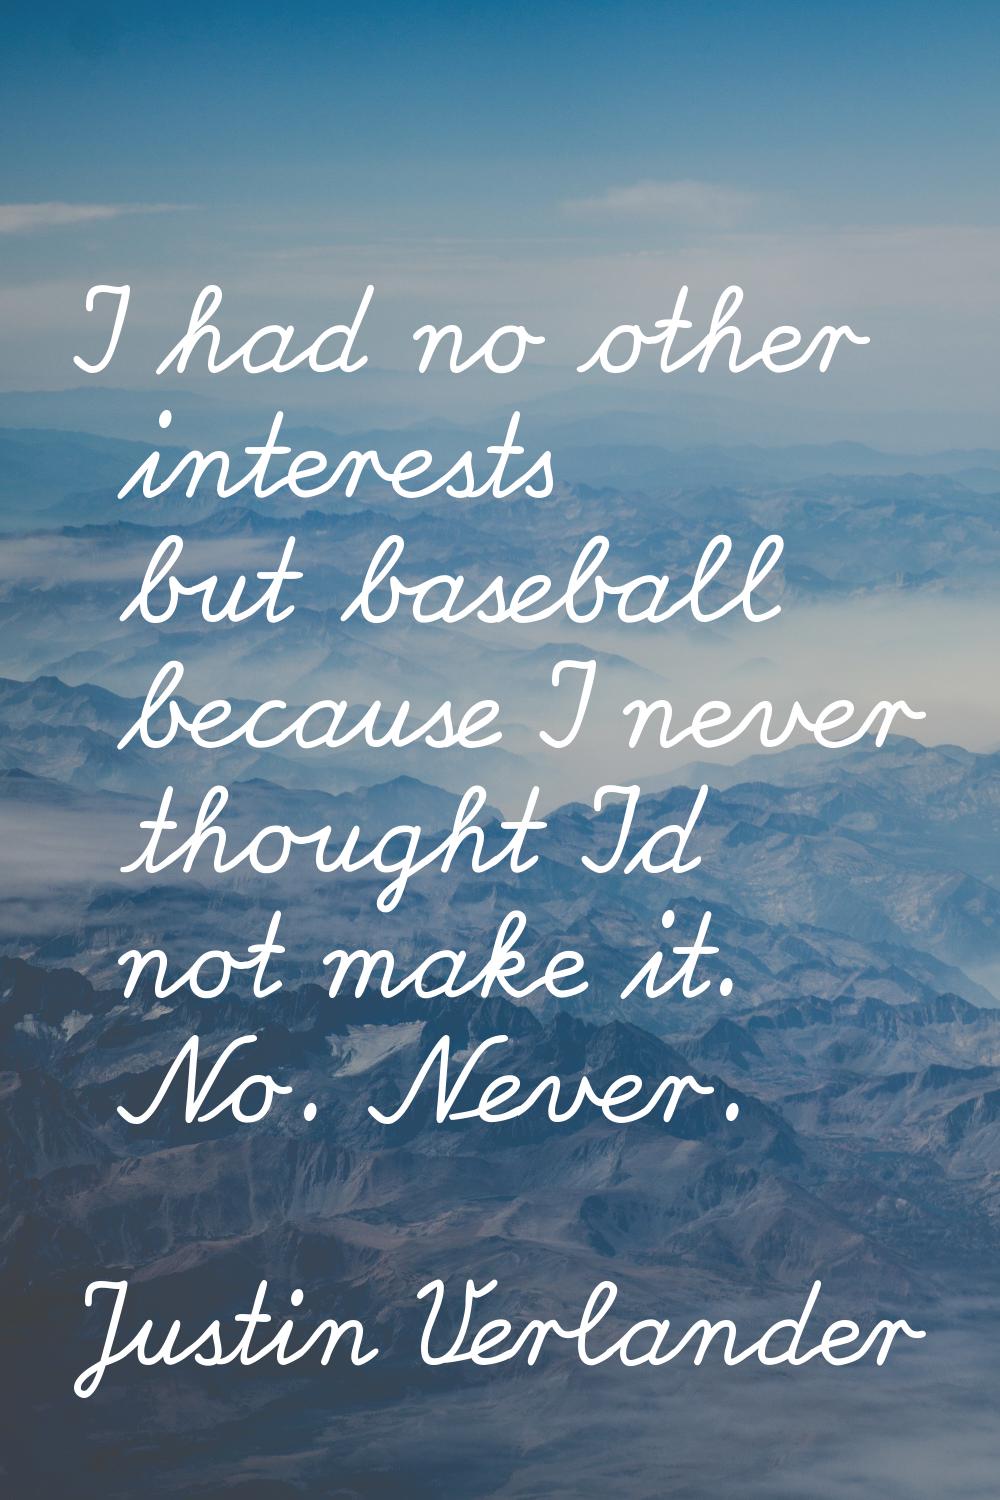 I had no other interests but baseball because I never thought I'd not make it. No. Never.